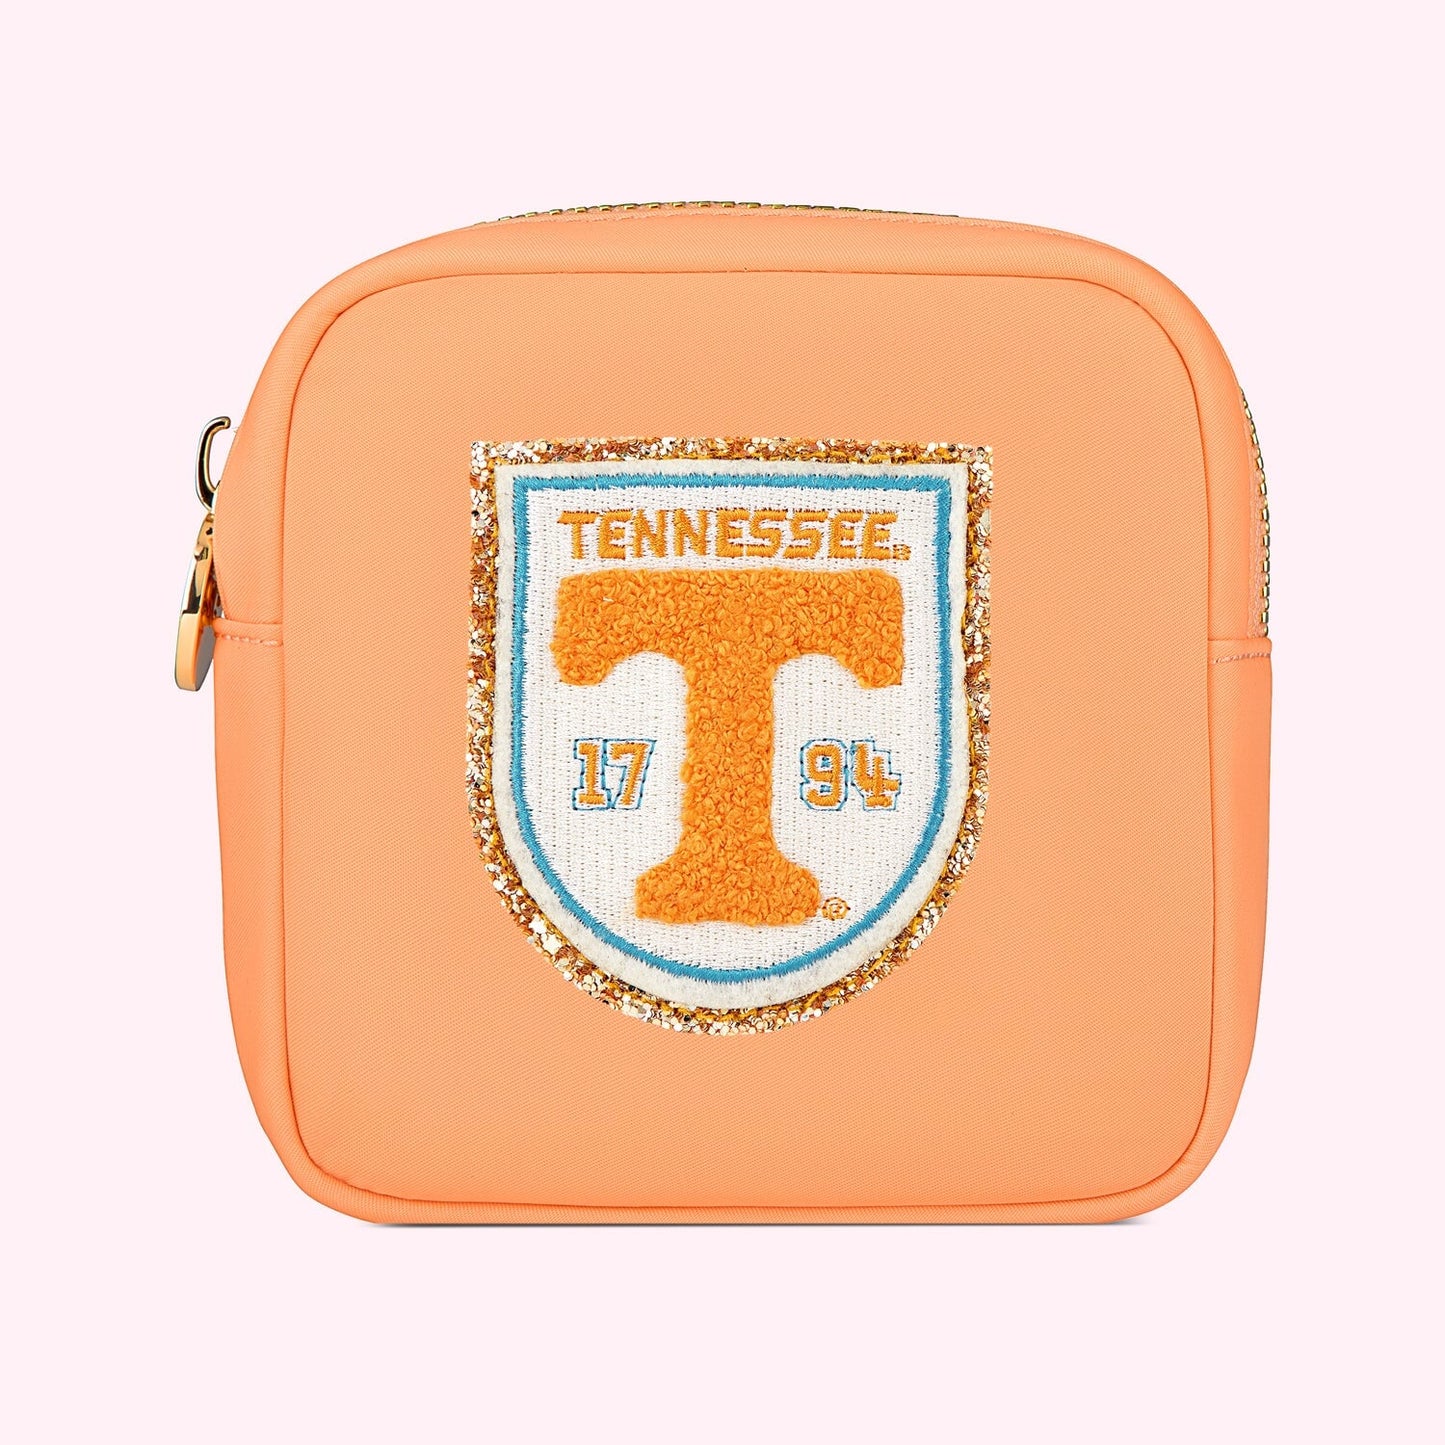 University of Tennessee Mini Pouch